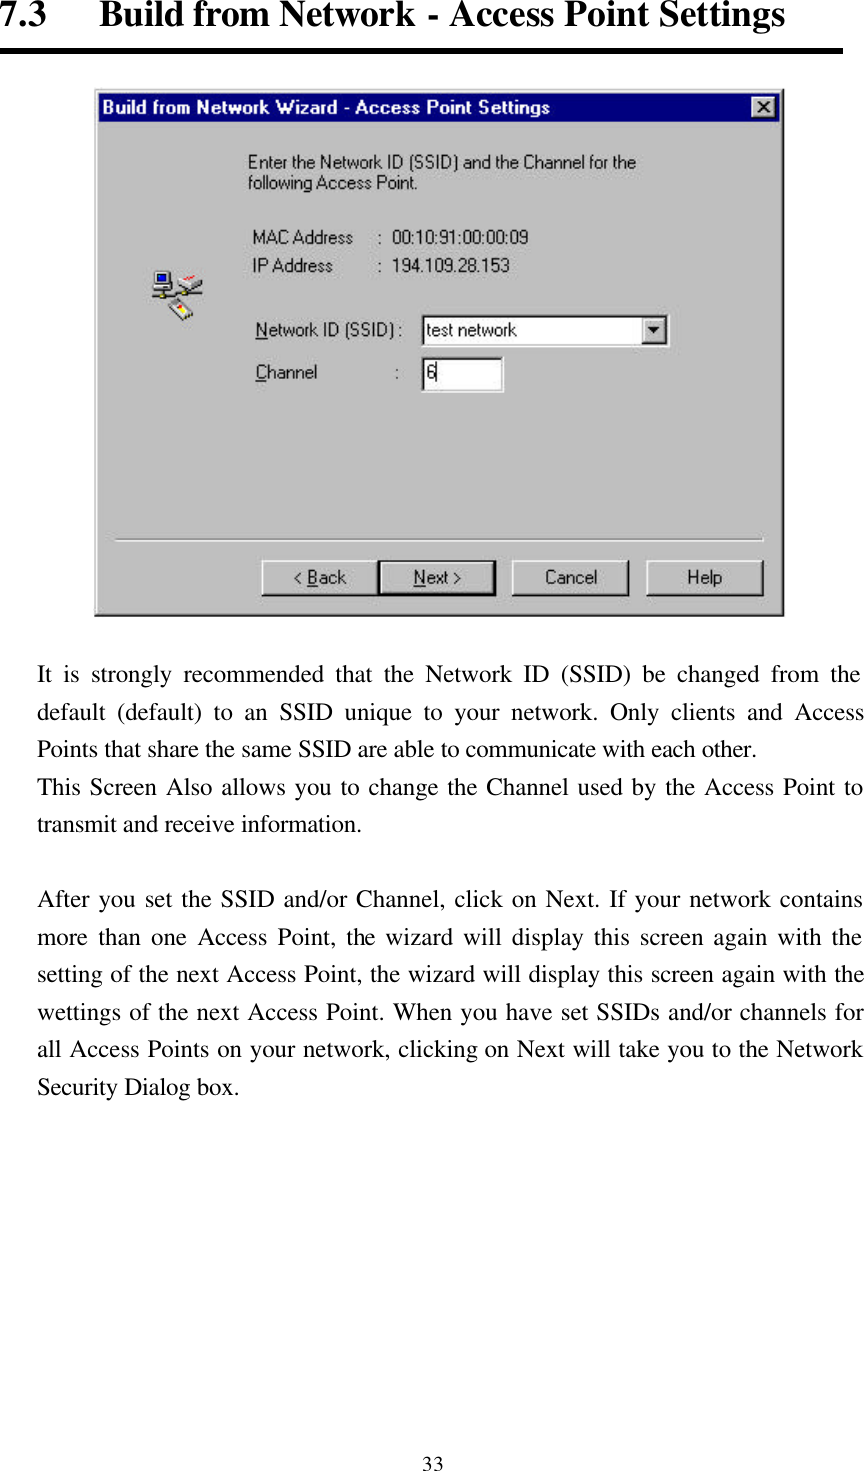  337.3   Build from Network - Access Point Settings   It is strongly recommended that the Network ID (SSID) be changed from the default (default) to an SSID unique to your network. Only clients and Access Points that share the same SSID are able to communicate with each other.   This Screen Also allows you to change the Channel used by the Access Point to transmit and receive information.  After you set the SSID and/or Channel, click on Next. If your network contains more than one Access Point, the wizard will display this screen again with the setting of the next Access Point, the wizard will display this screen again with the wettings of the next Access Point. When you have set SSIDs and/or channels for all Access Points on your network, clicking on Next will take you to the Network Security Dialog box.  